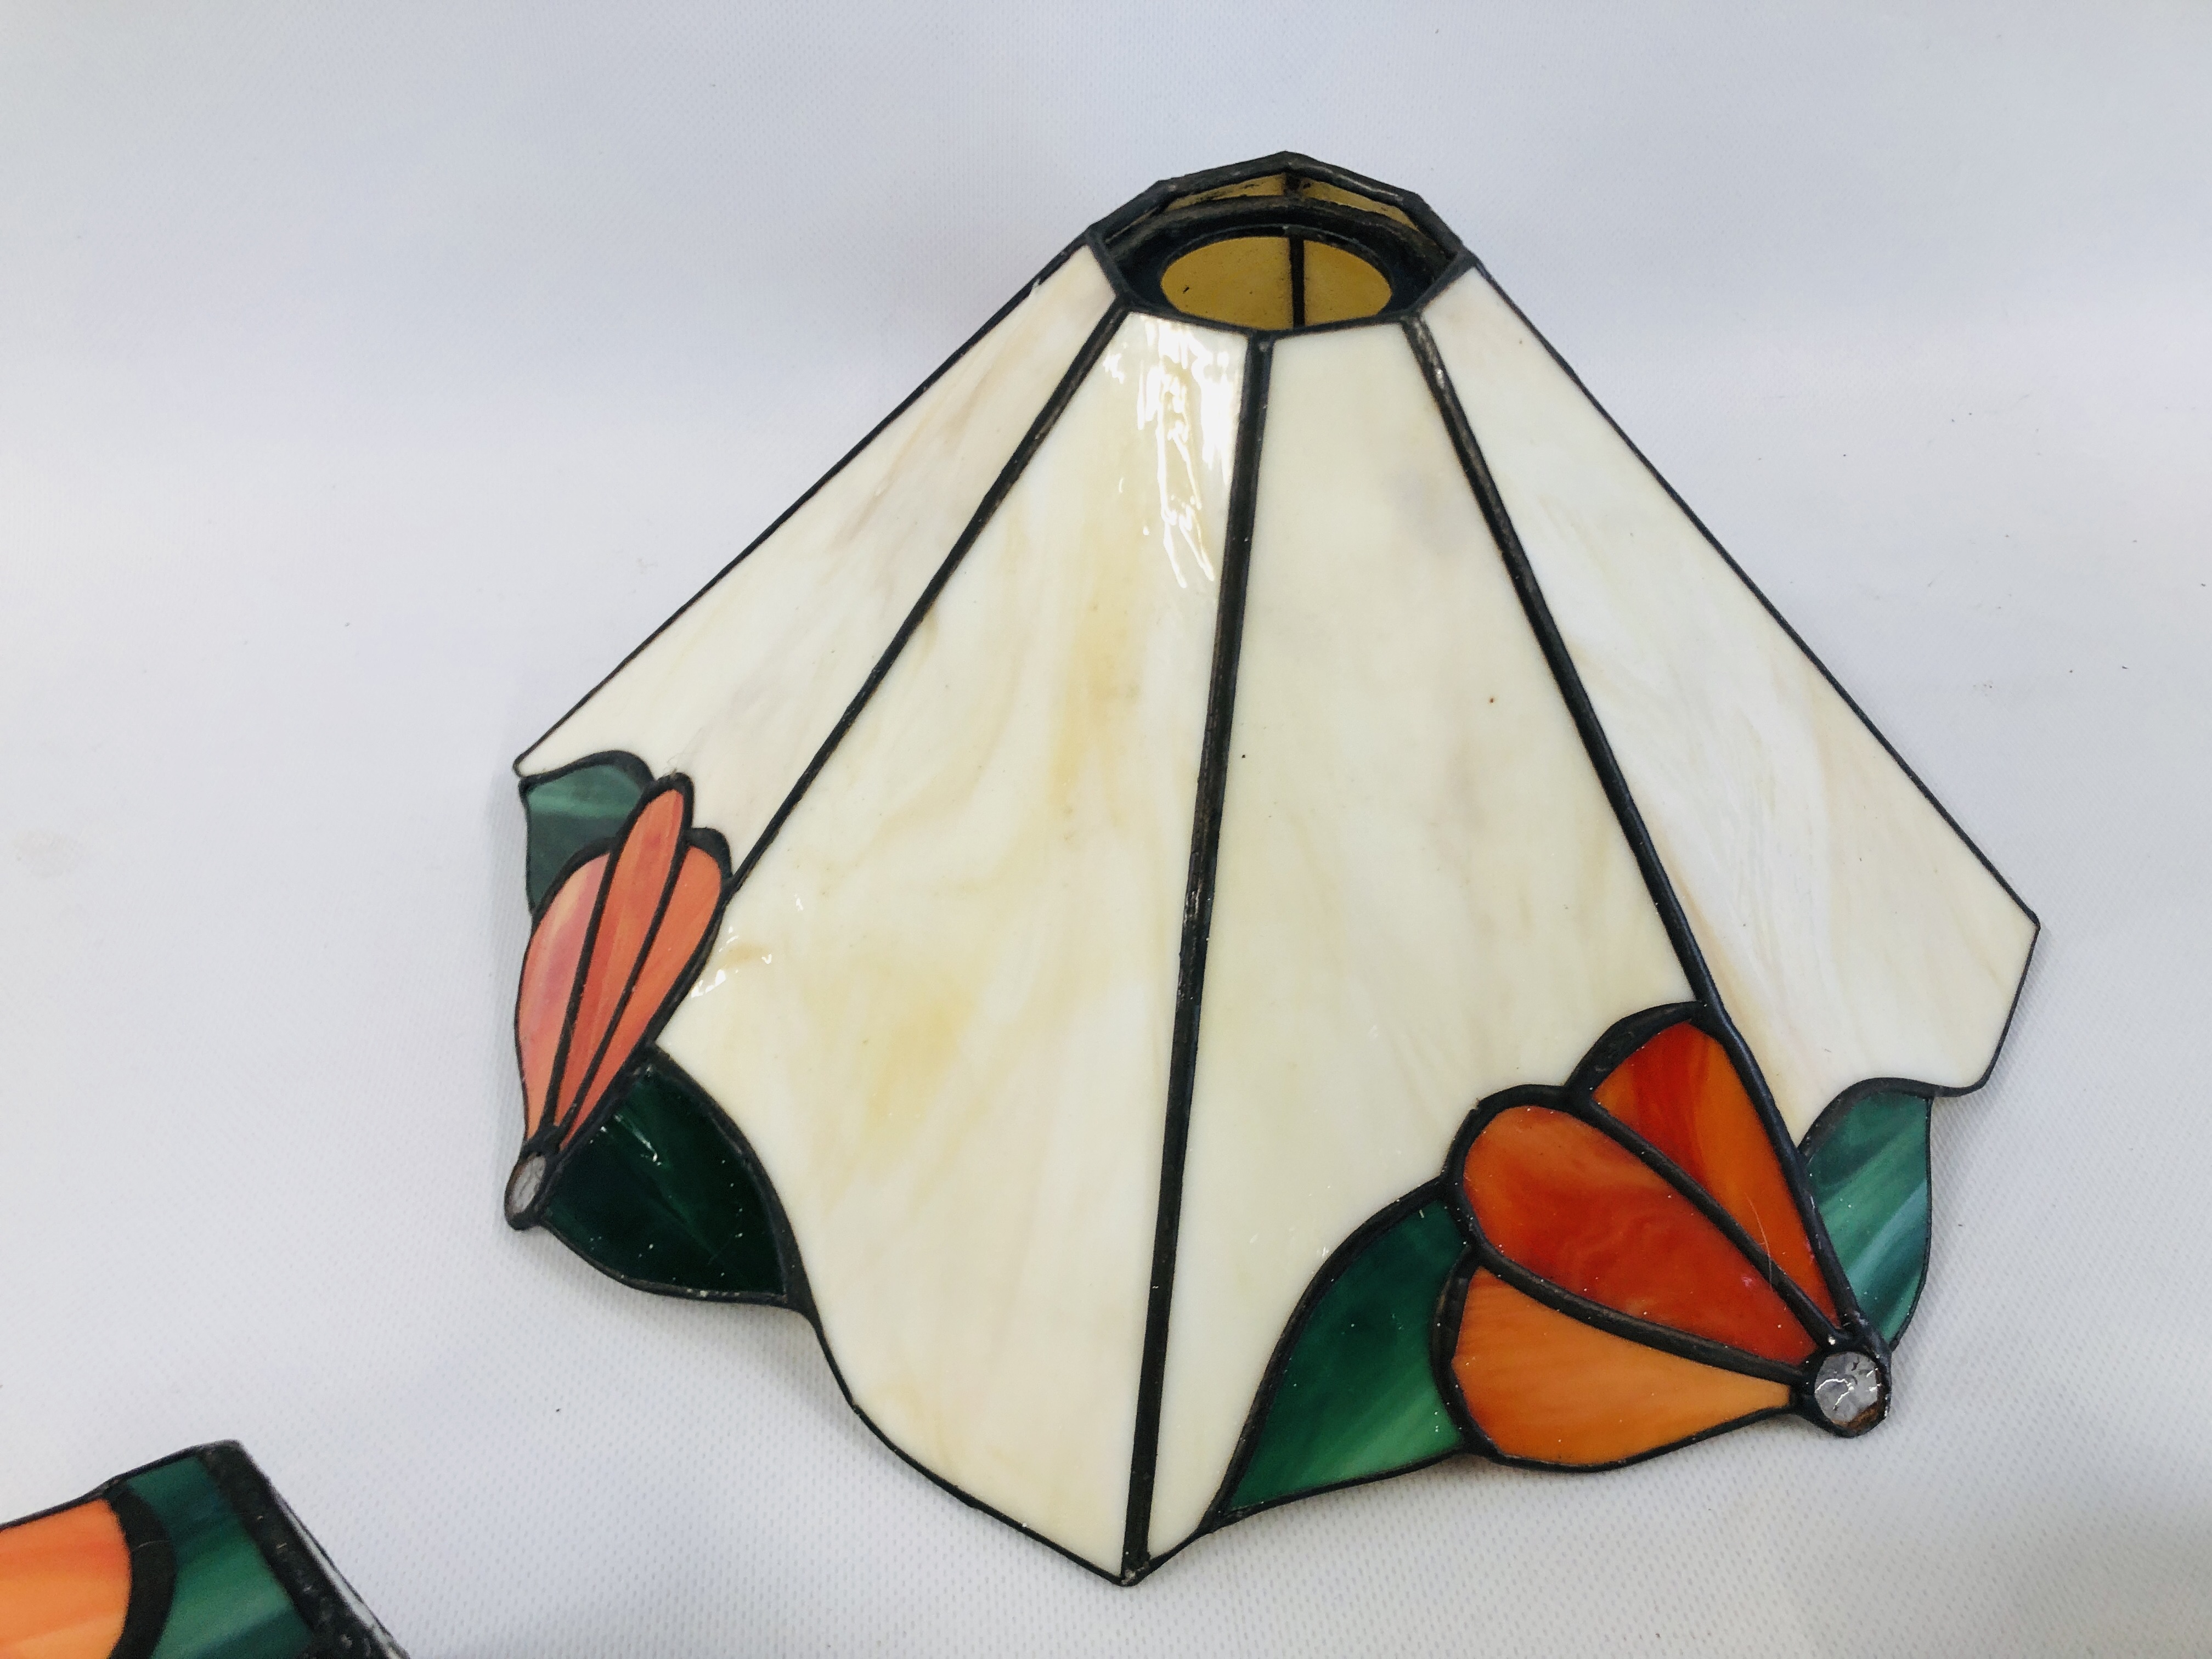 A TIFFANY STYLE STAINED GLASS PENDANT LAMP SHADE ALONG WITH TWO MATCHING WALL LIGHT SHADES, 1 A/F. - Image 2 of 7